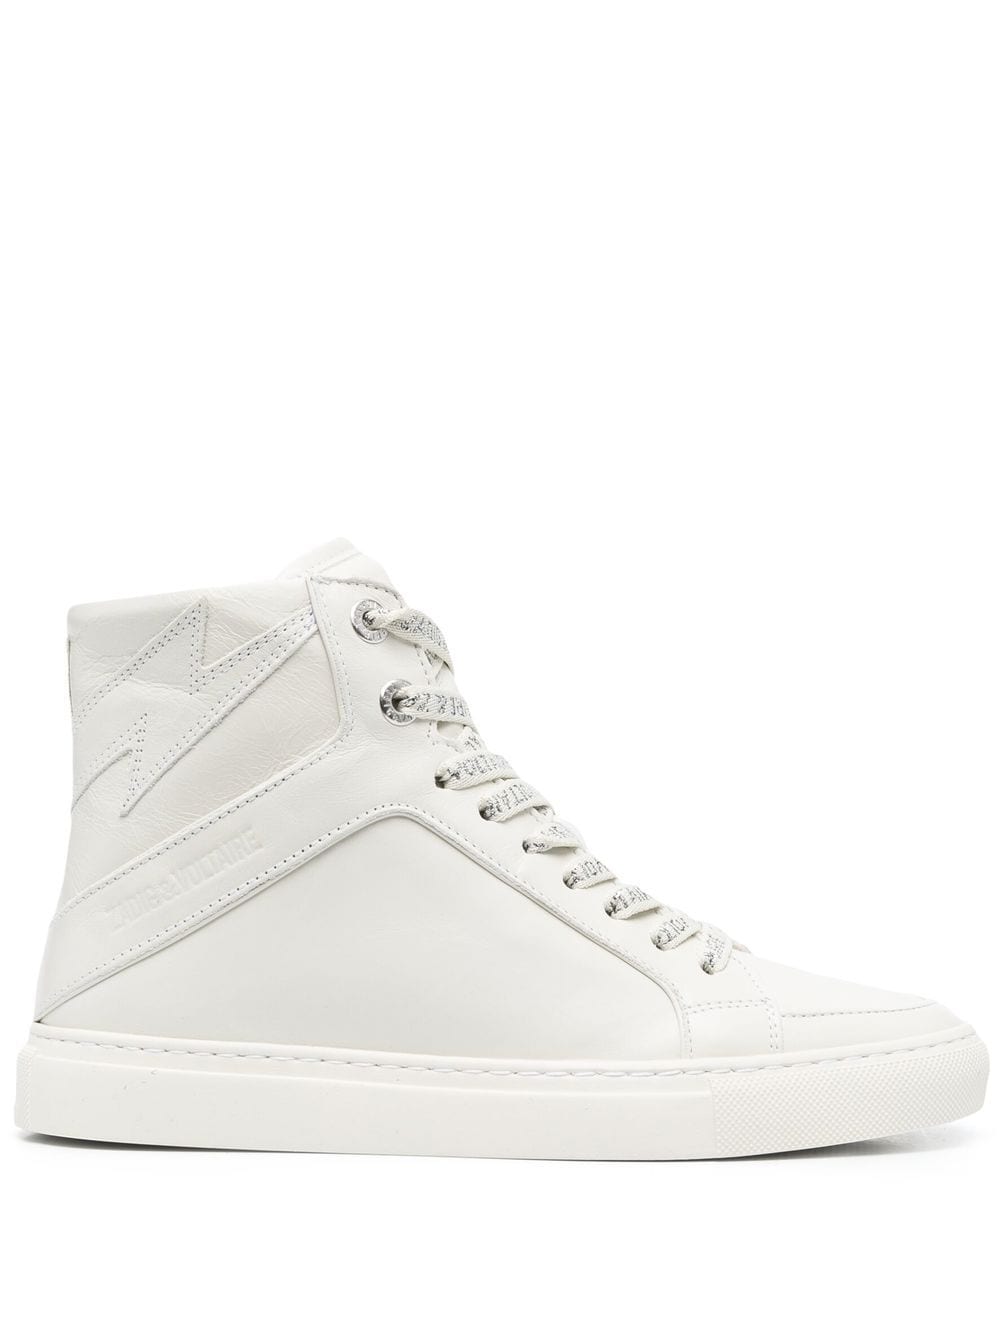 ZADIG & VOLTAIRE HIGH FLASH LEATHER trainers